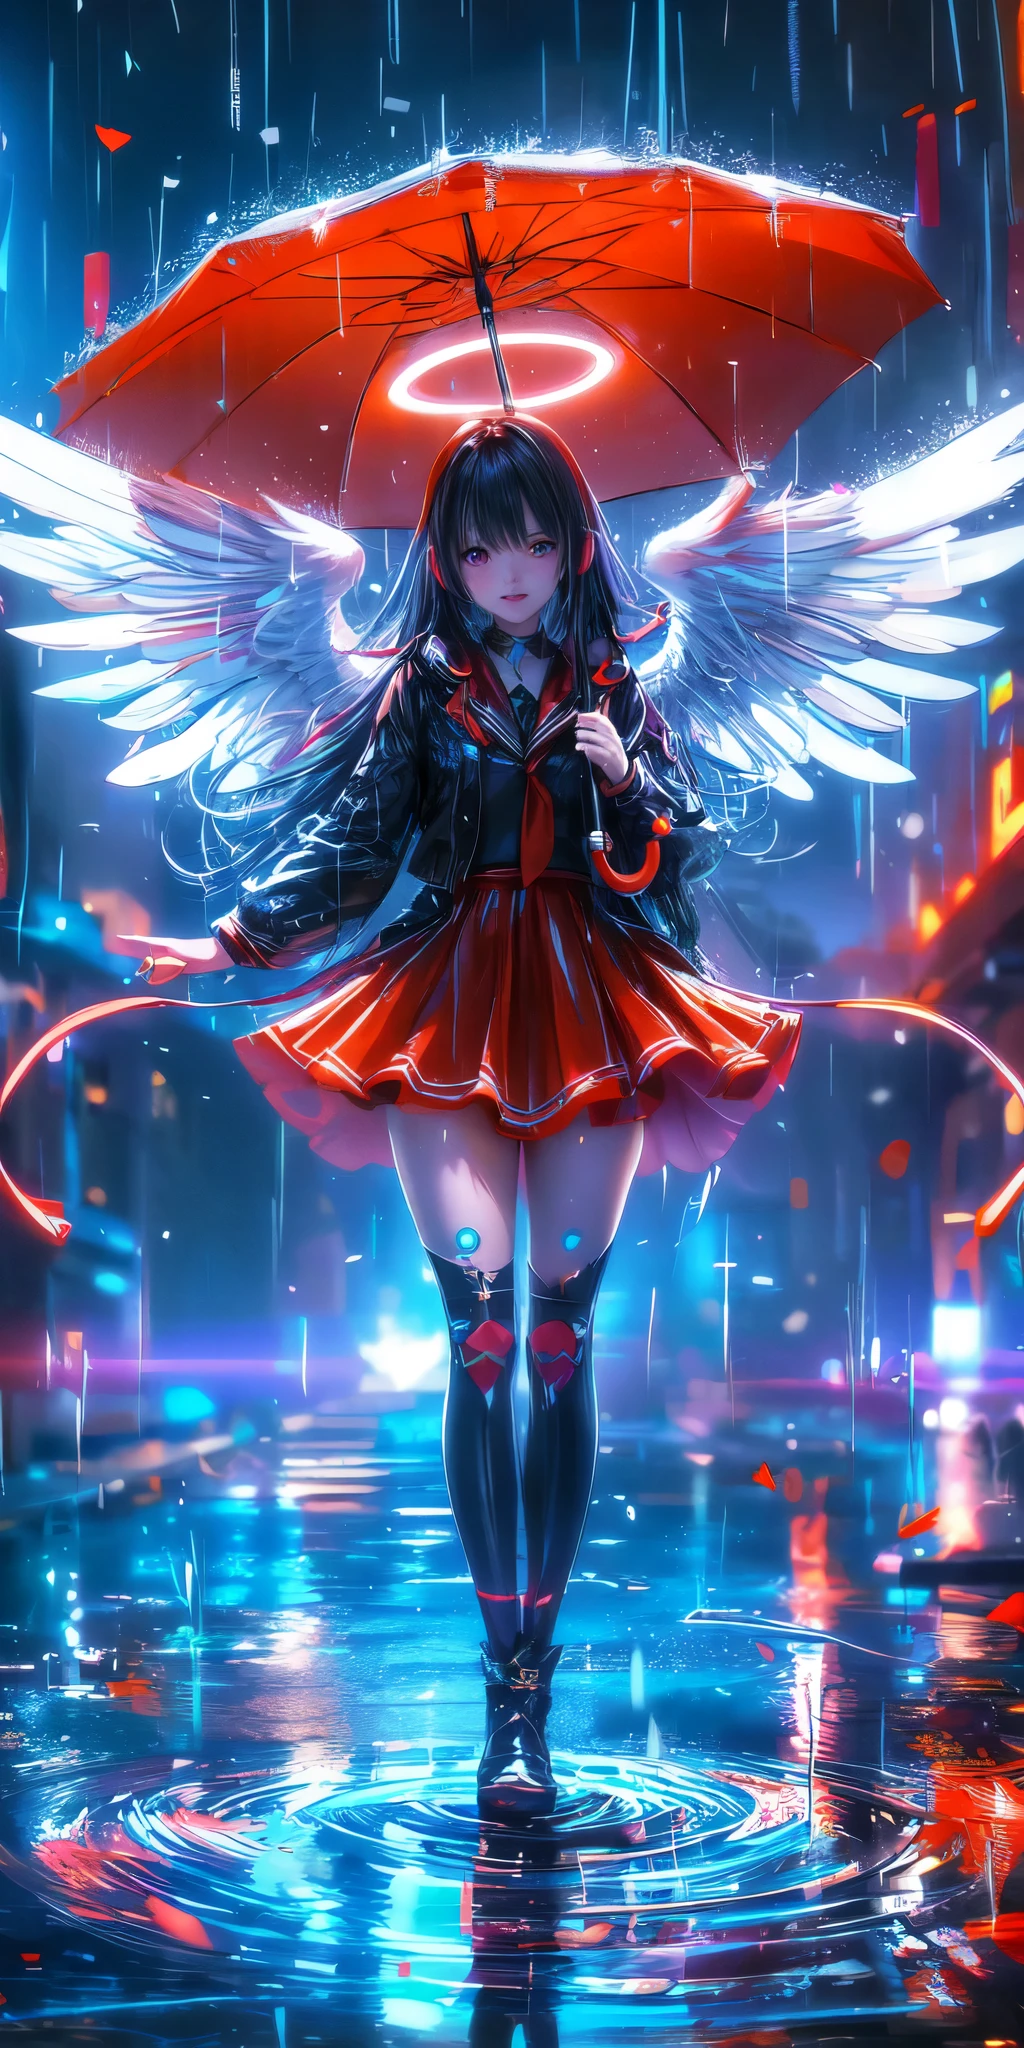 anime girl with angel wings holding an umbrella in the rain, anime style 4 k, anime art wallpaper 8 k, anime art wallpaper 4k, anime art wallpaper 4 k, anime style. 8k, anime wallpaper 4k, anime wallpaper 4 k, by Yuumei, 4k anime wallpaper, anime style digital art, anime styled digital art, nightcore